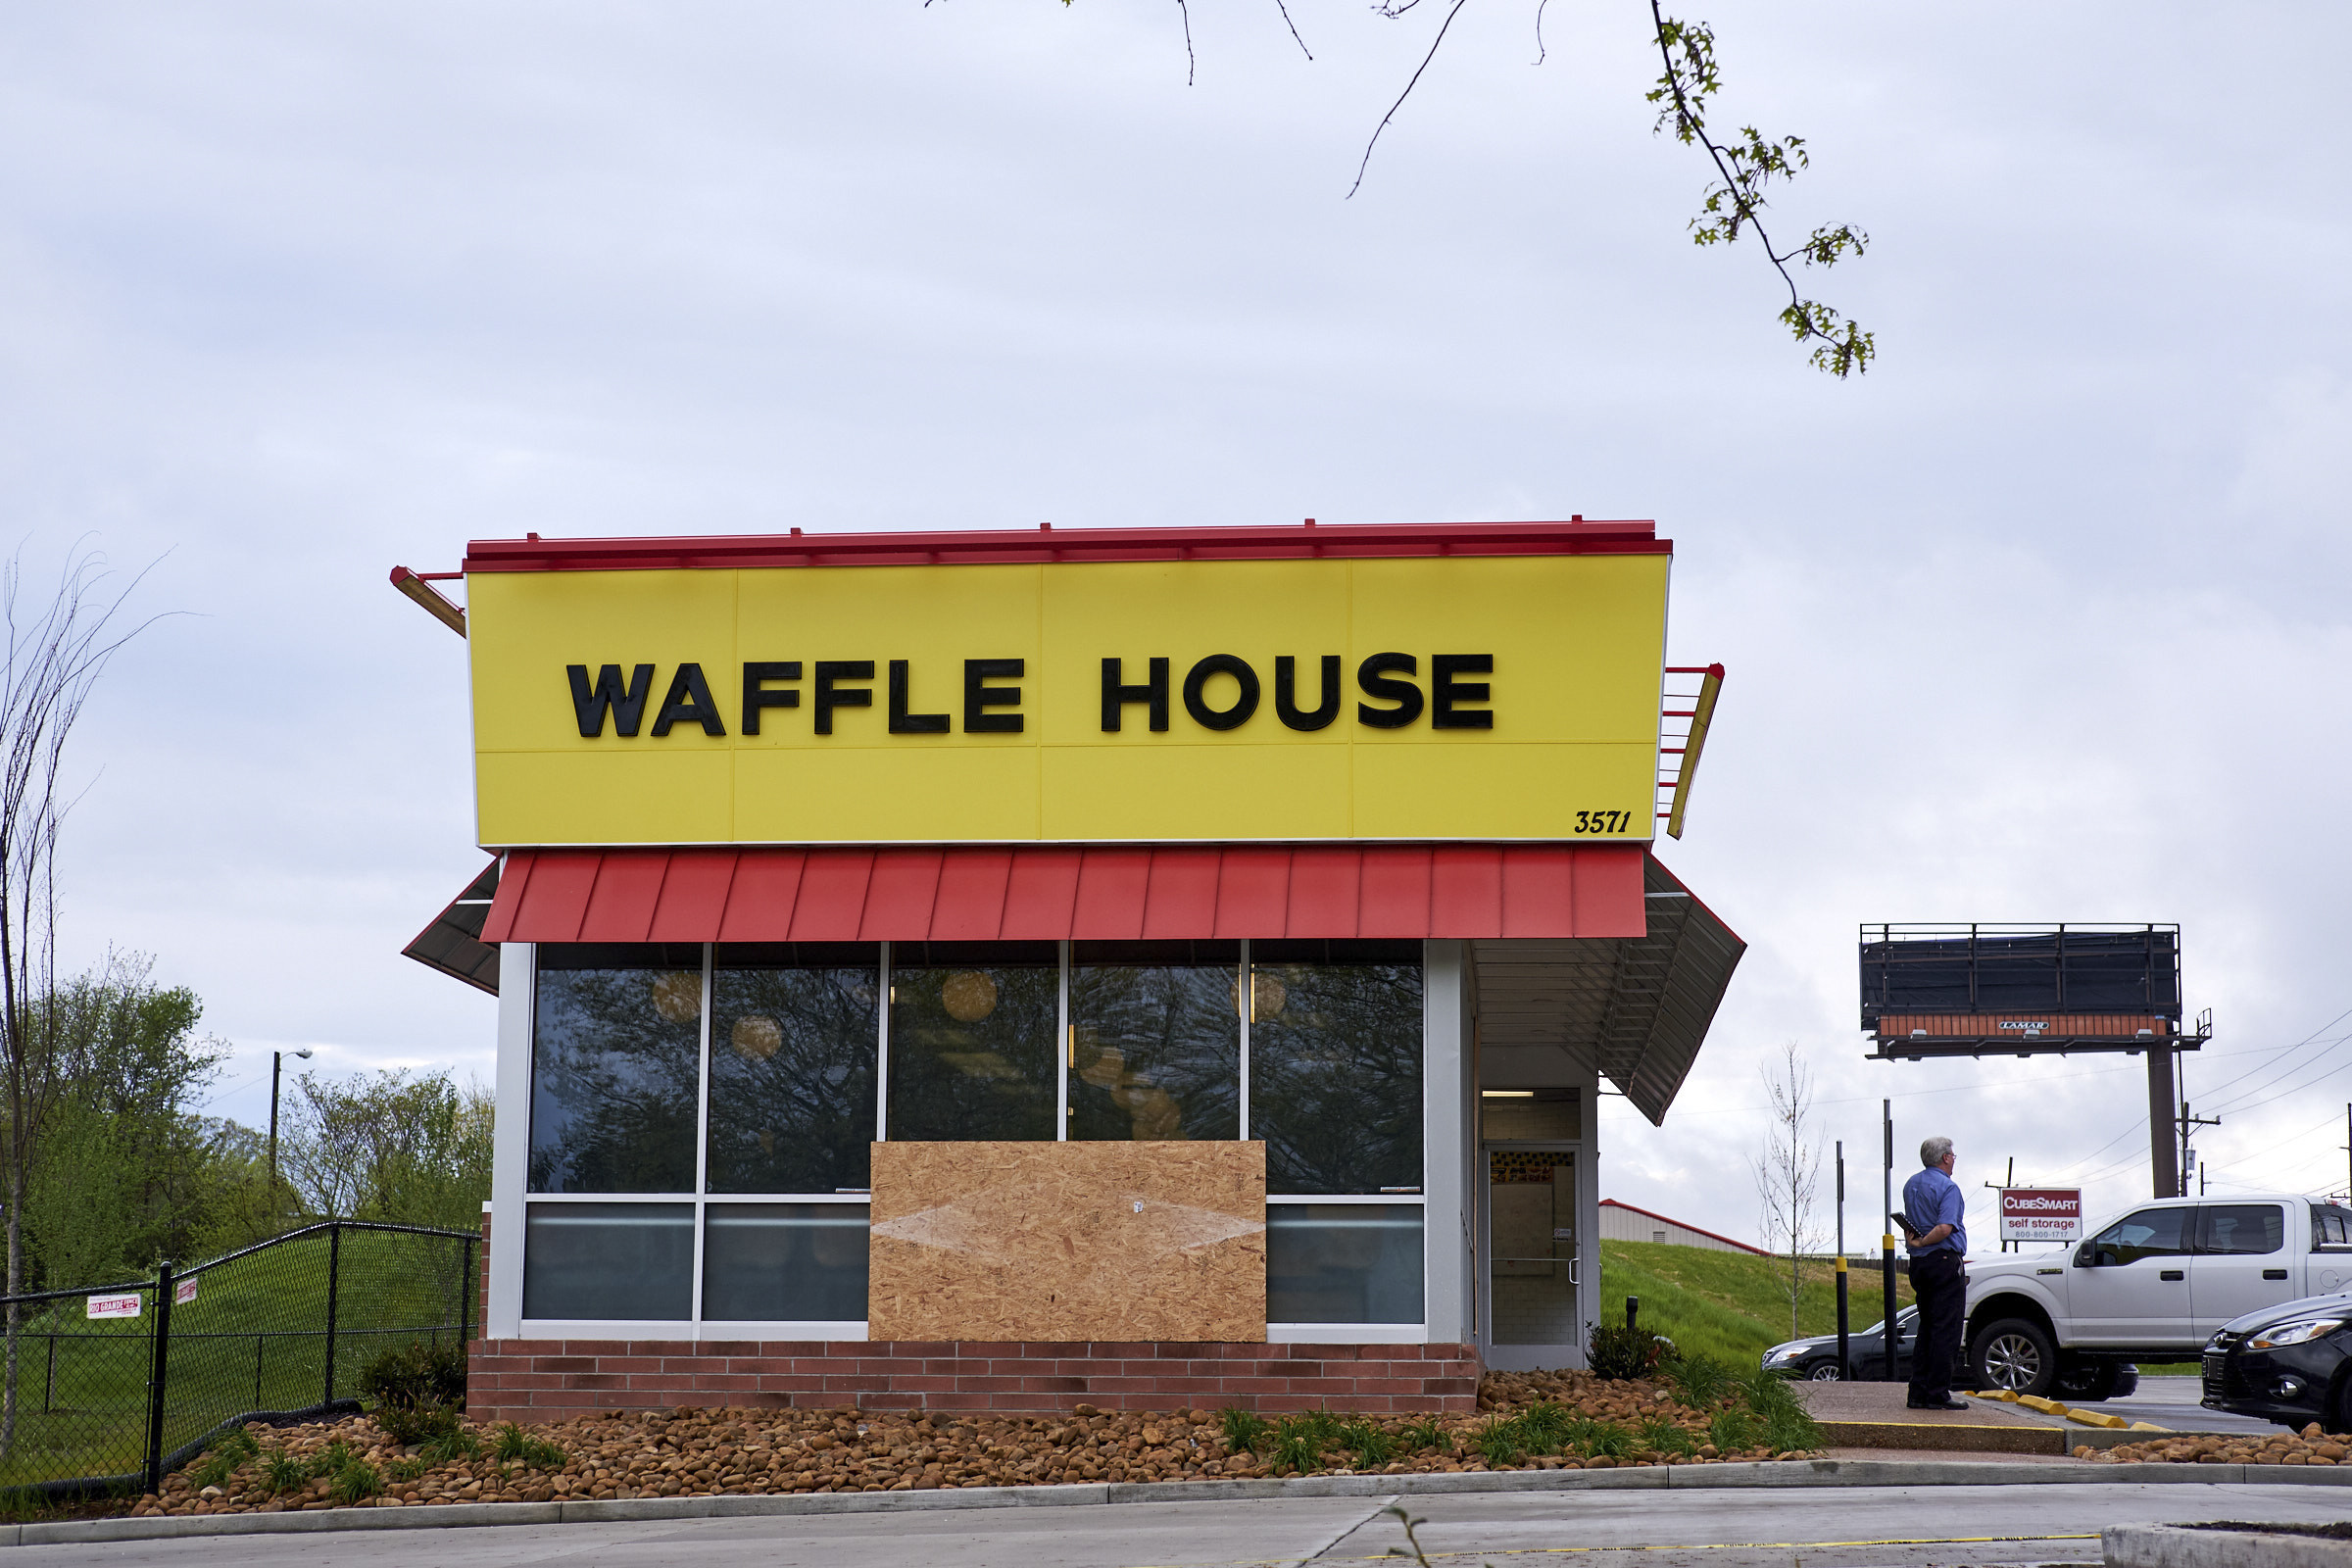 PHOTO: The Waffle House restaurant where a gunman opened fire early Sunday morning in Nashville, Tenn., April 23, 2018.